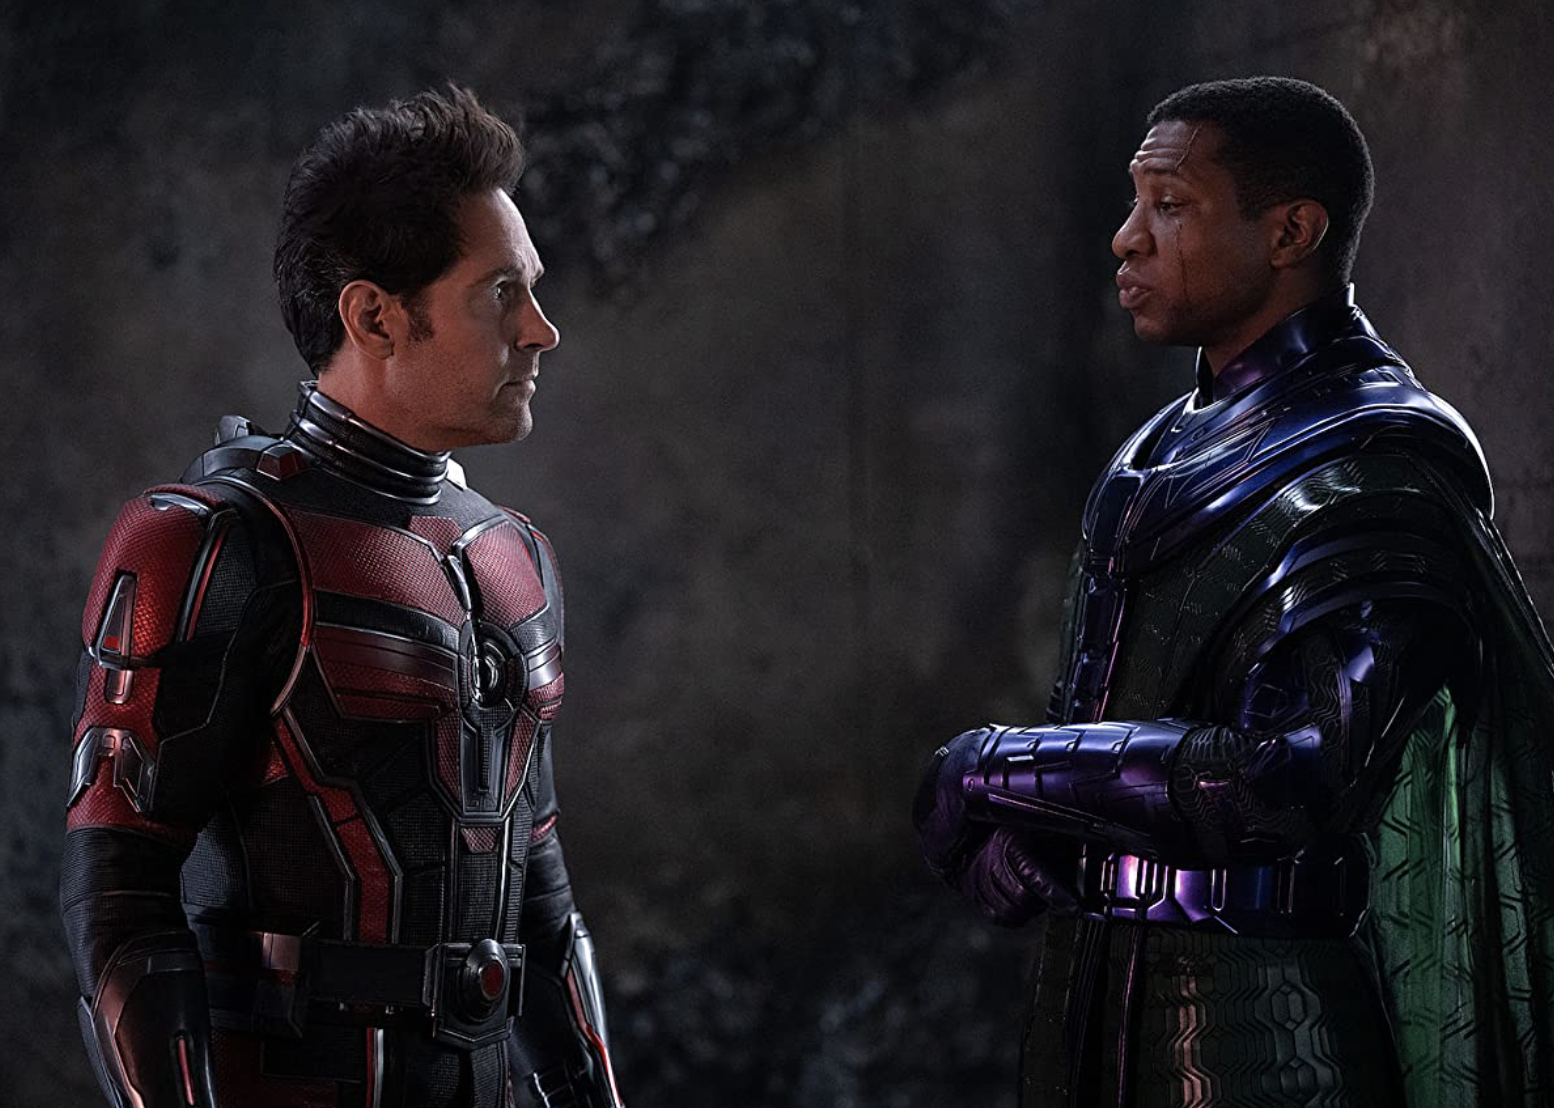 Paul Rudd and Jonathan Majors in "Ant-Man and the Wasp: Quantumania".